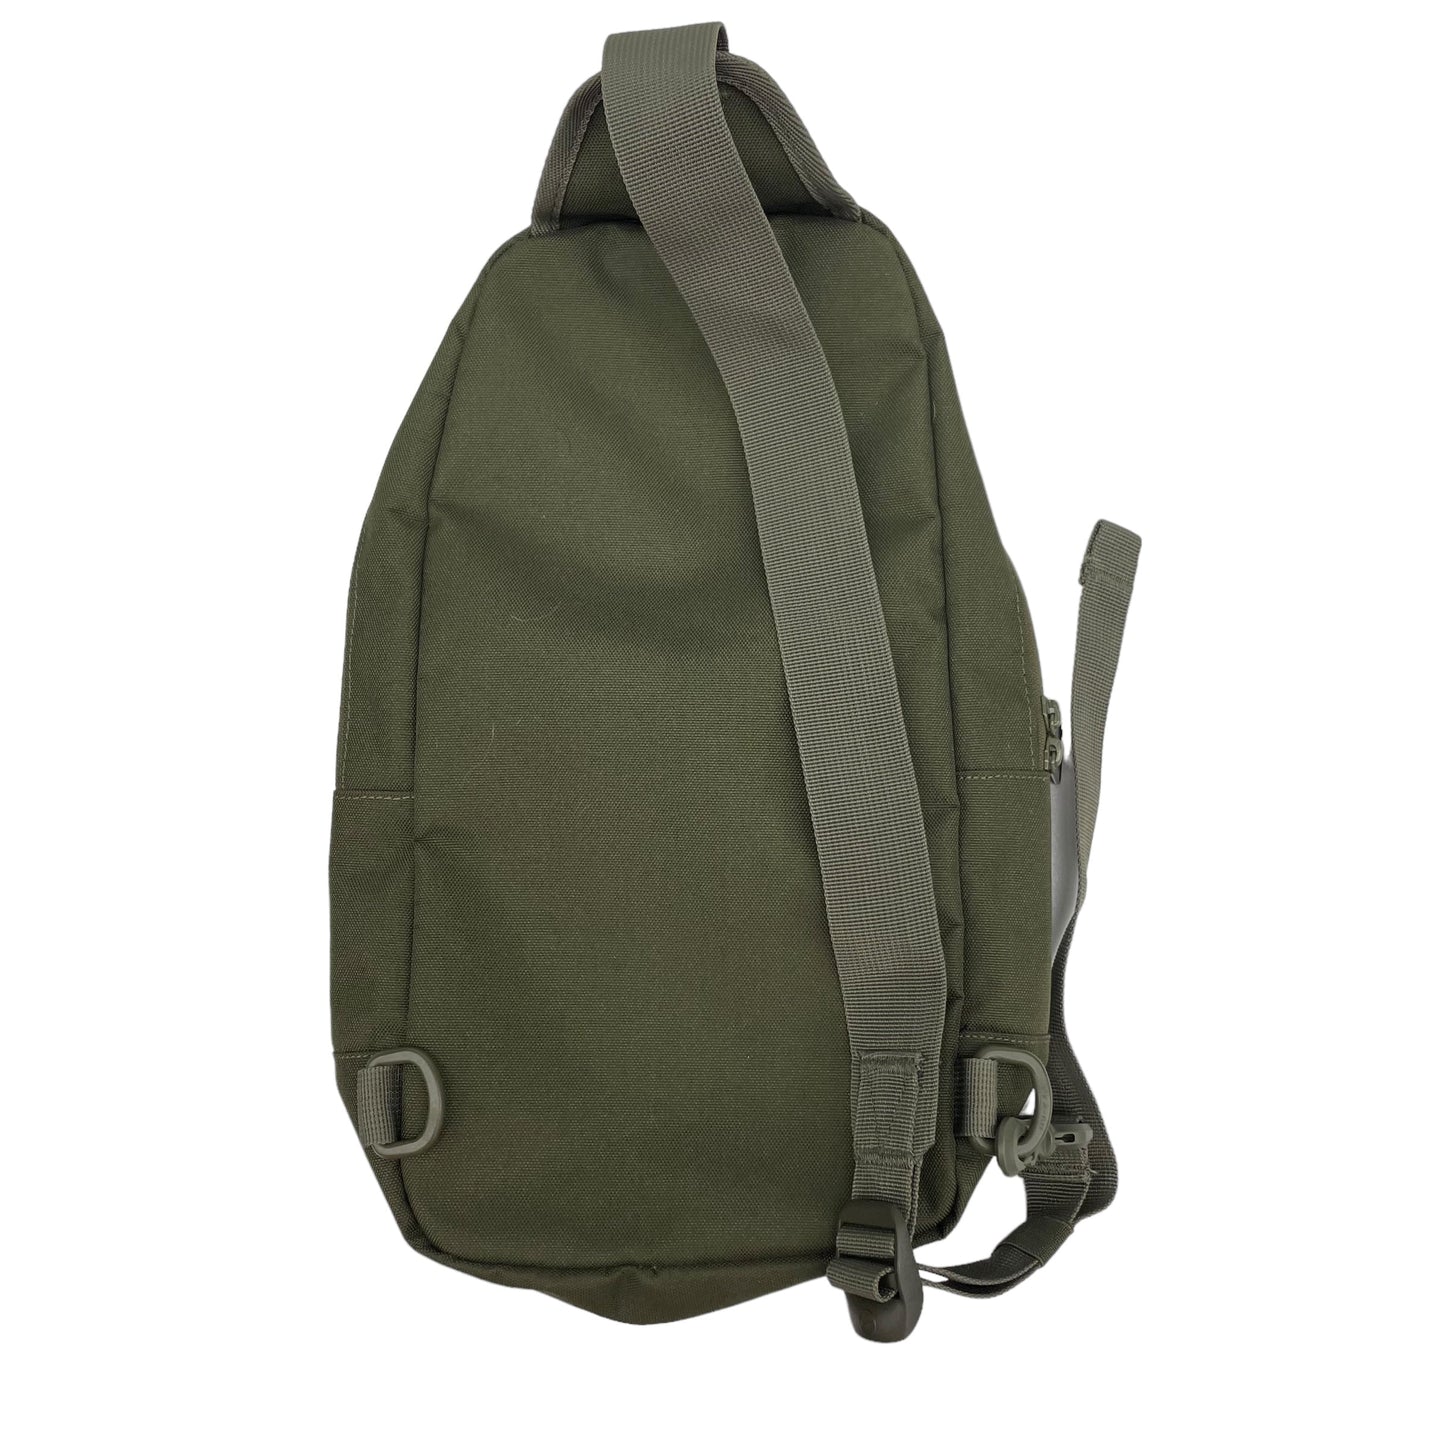 GREEN BACKPACK by HERSCHEL Size:SMALL